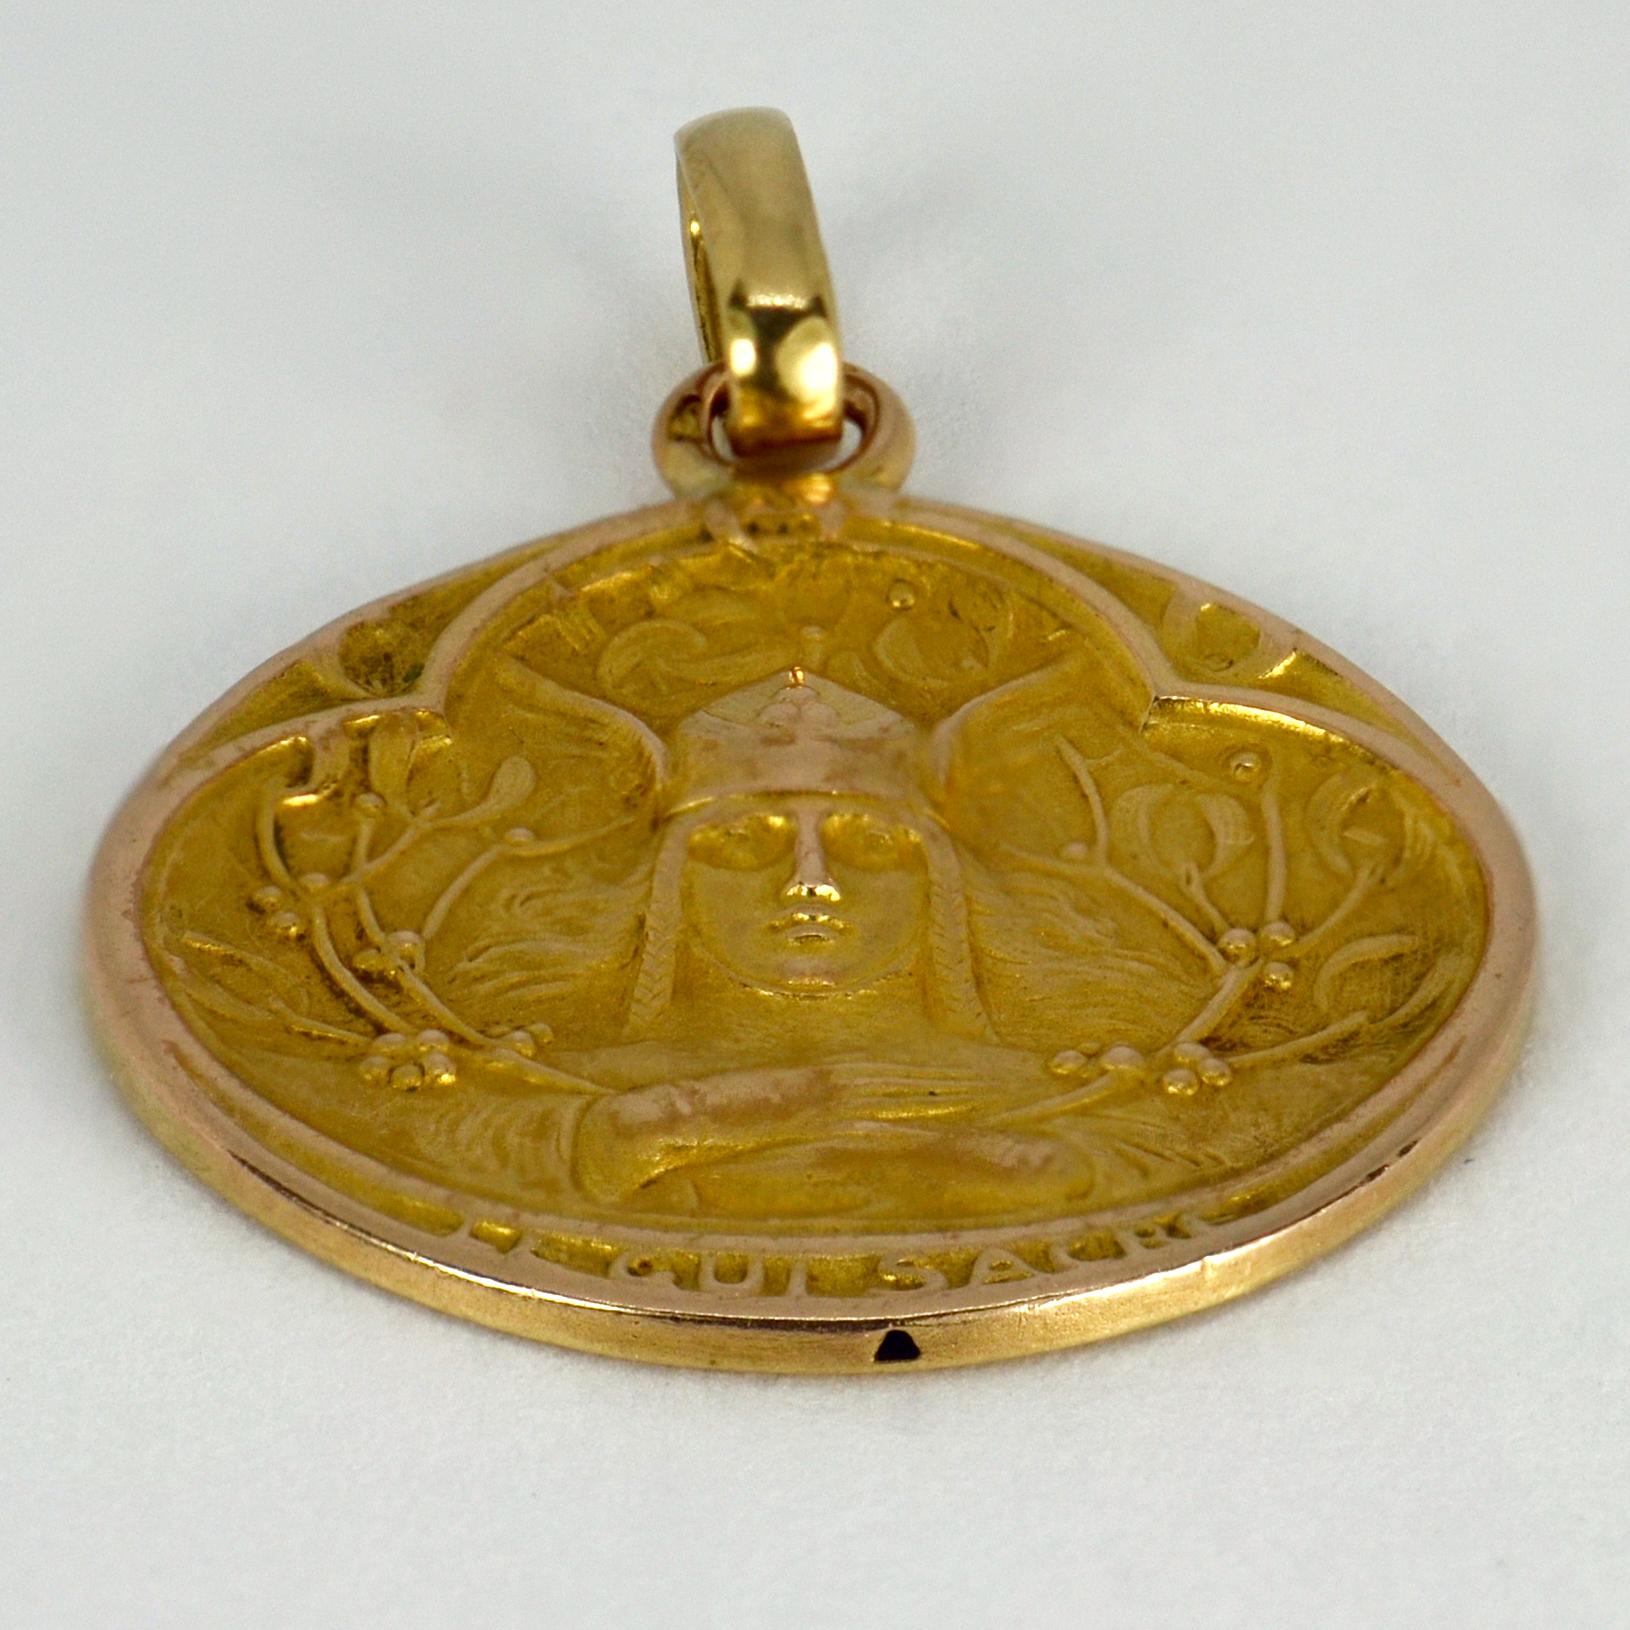 A French 18 karat (18K) yellow gold charm pendant designed as a medal depicting a warrior with mistletoe surround, with the words ‘Le Gui Sacre’ below meaning ‘The Sacred Mistletoe’. Stamped with the French eagle’s head for 18 karat